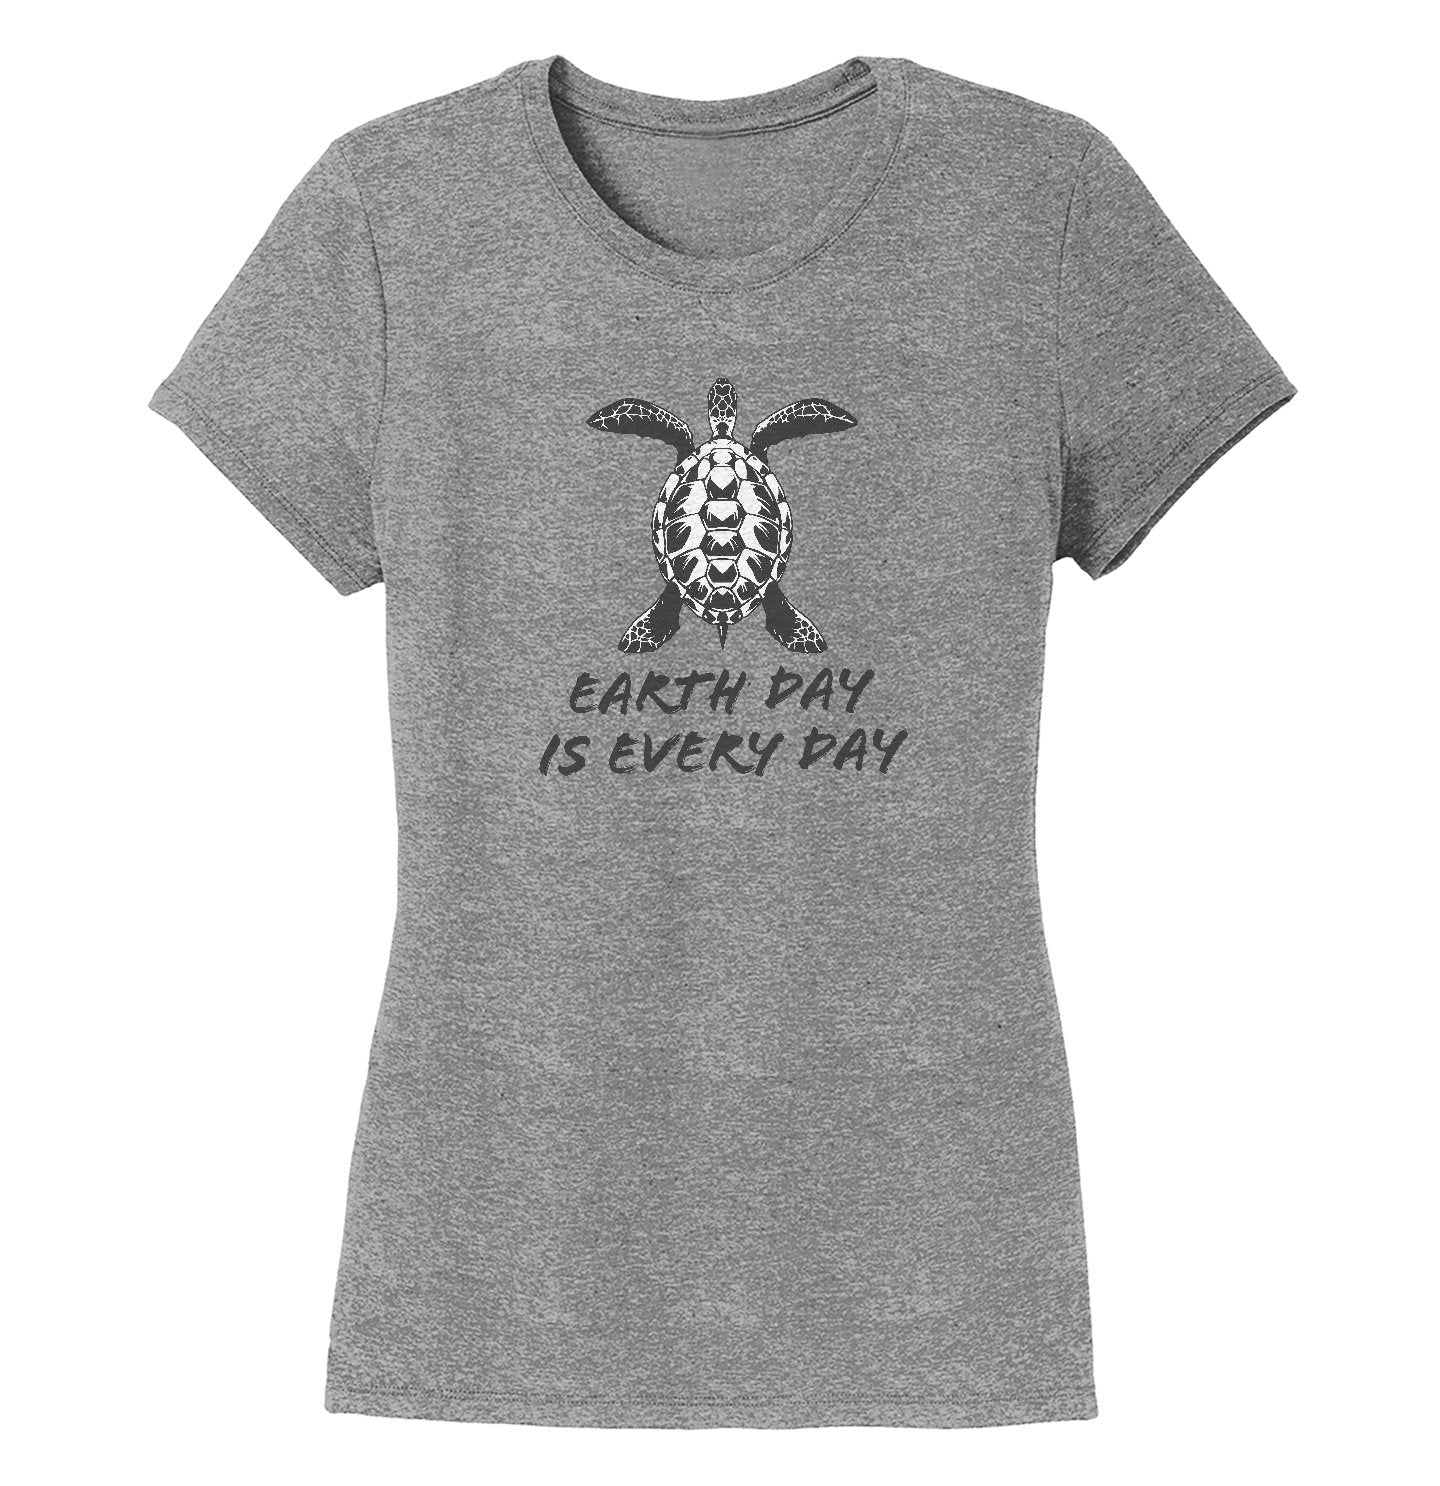 Earth Day is Every Day Sea Turtle - Women's Tri-Blend T-Shirt